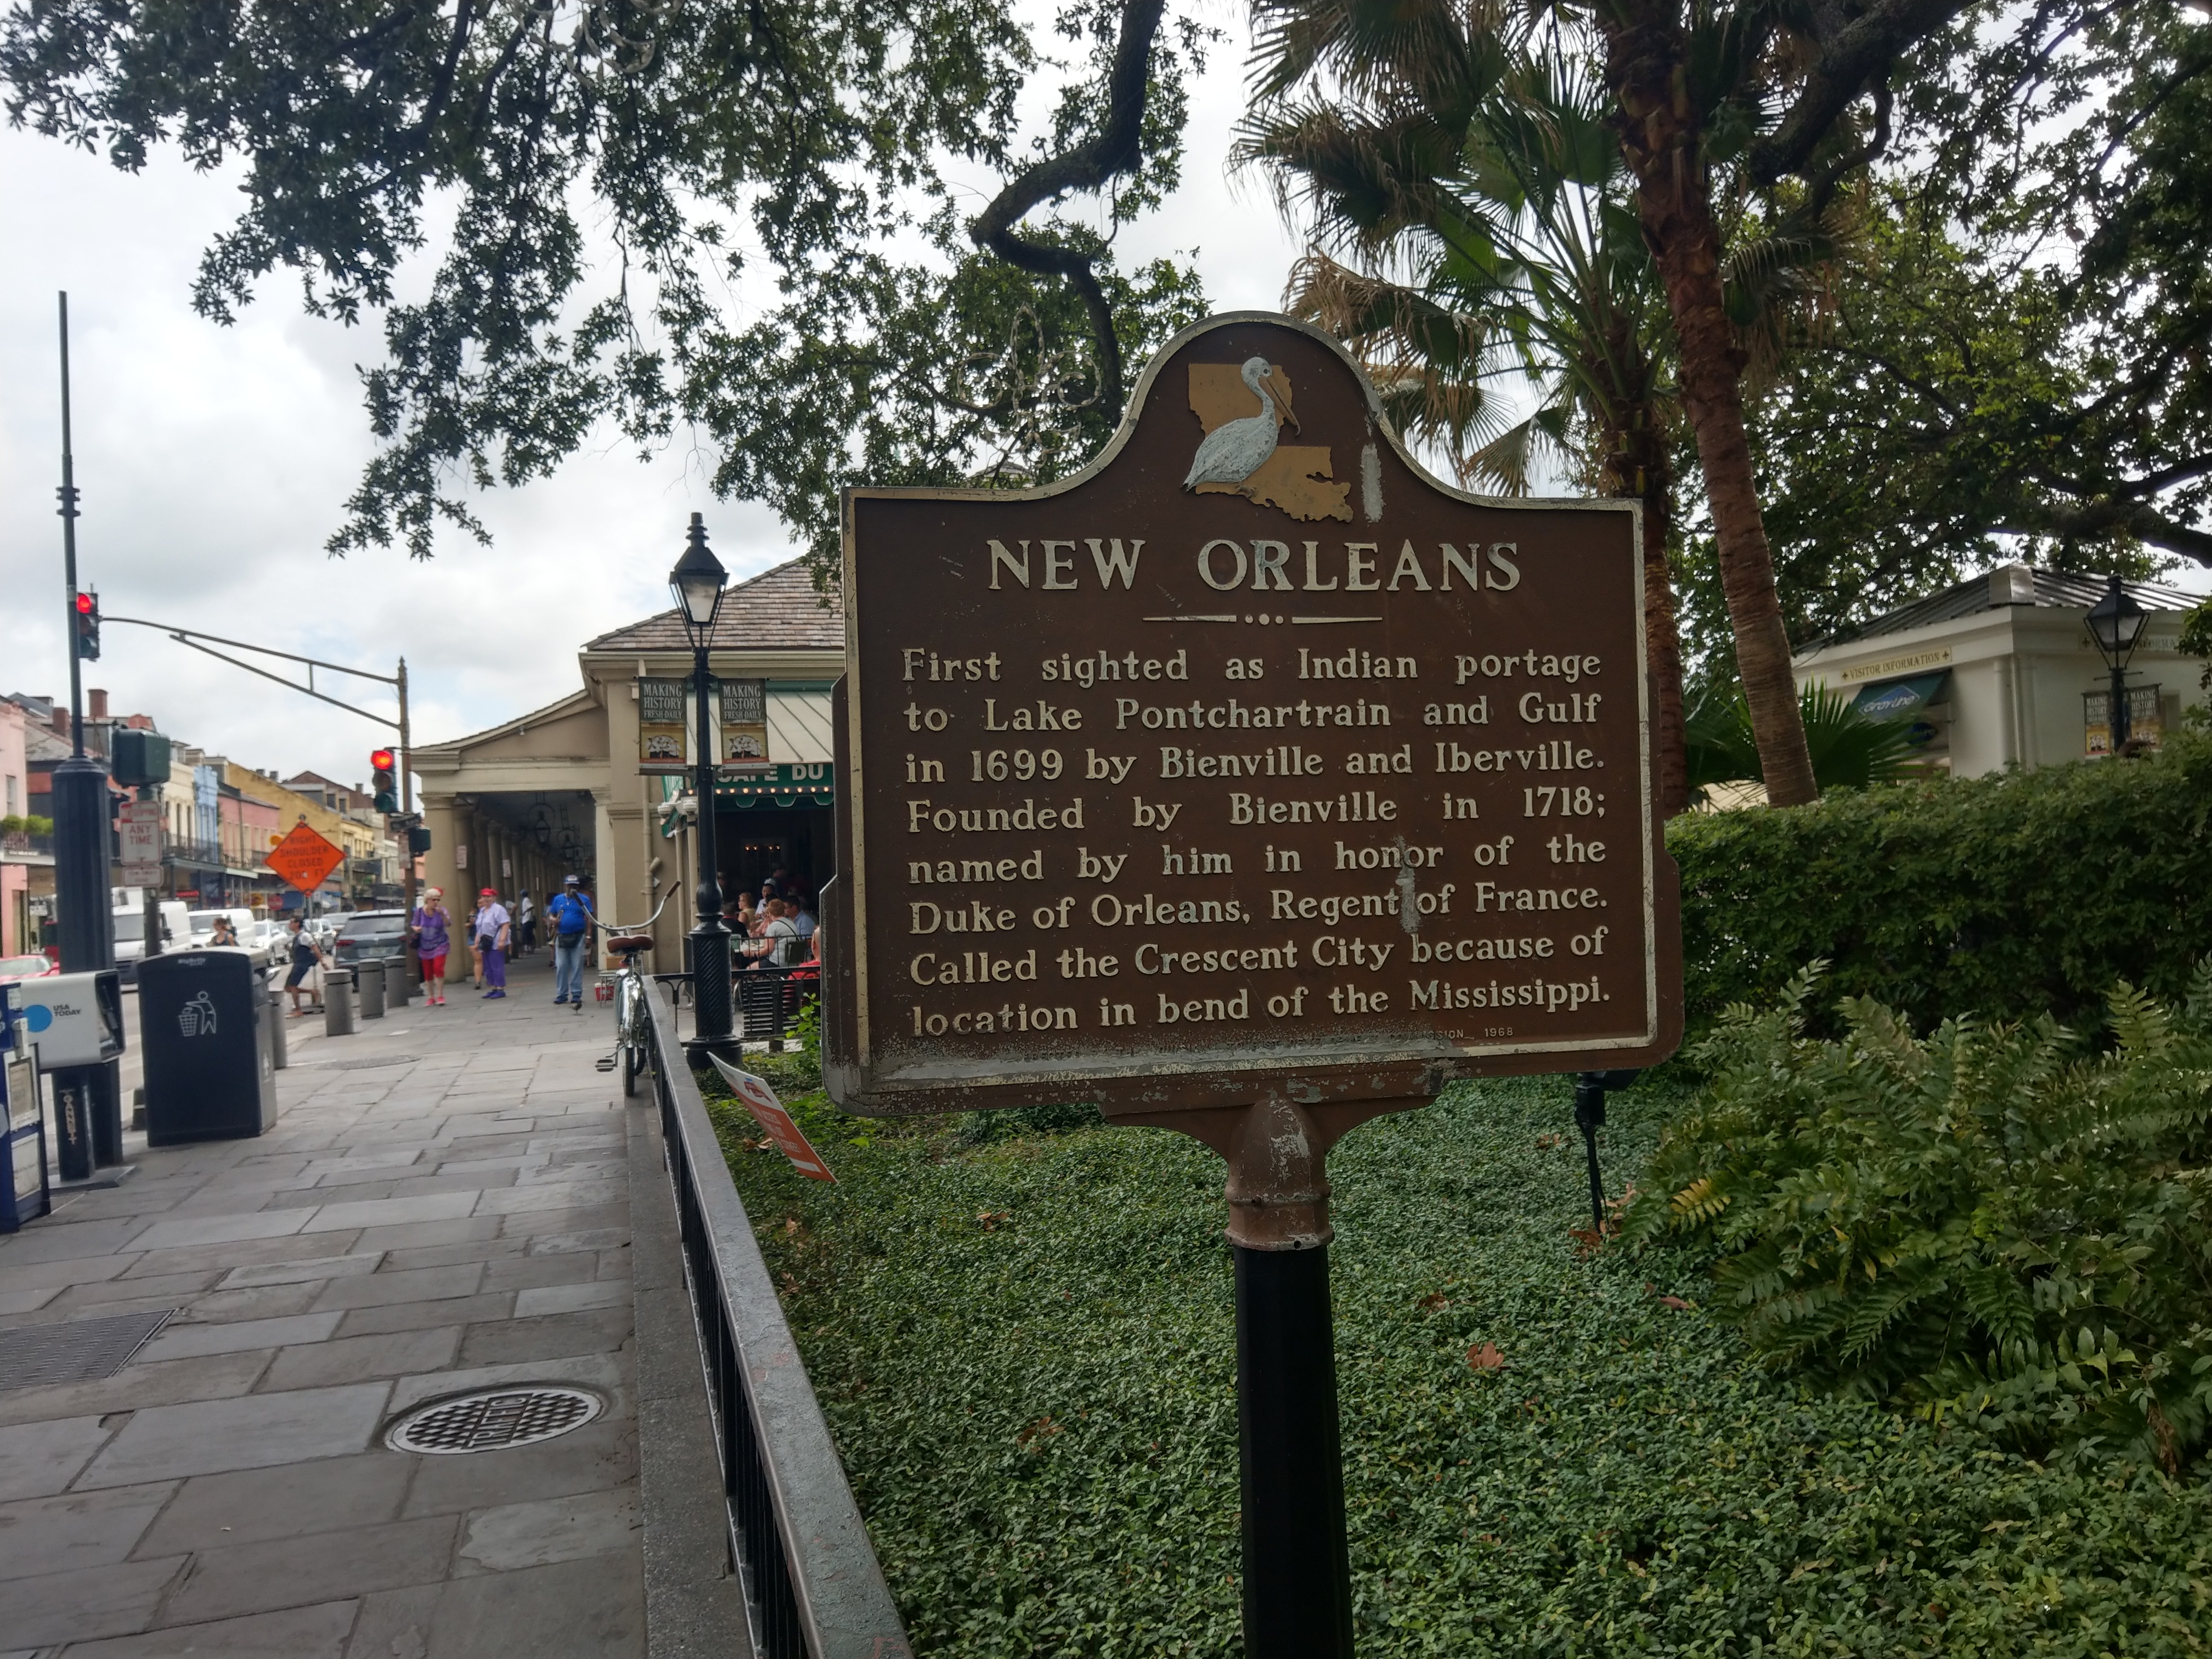 New Orleans history